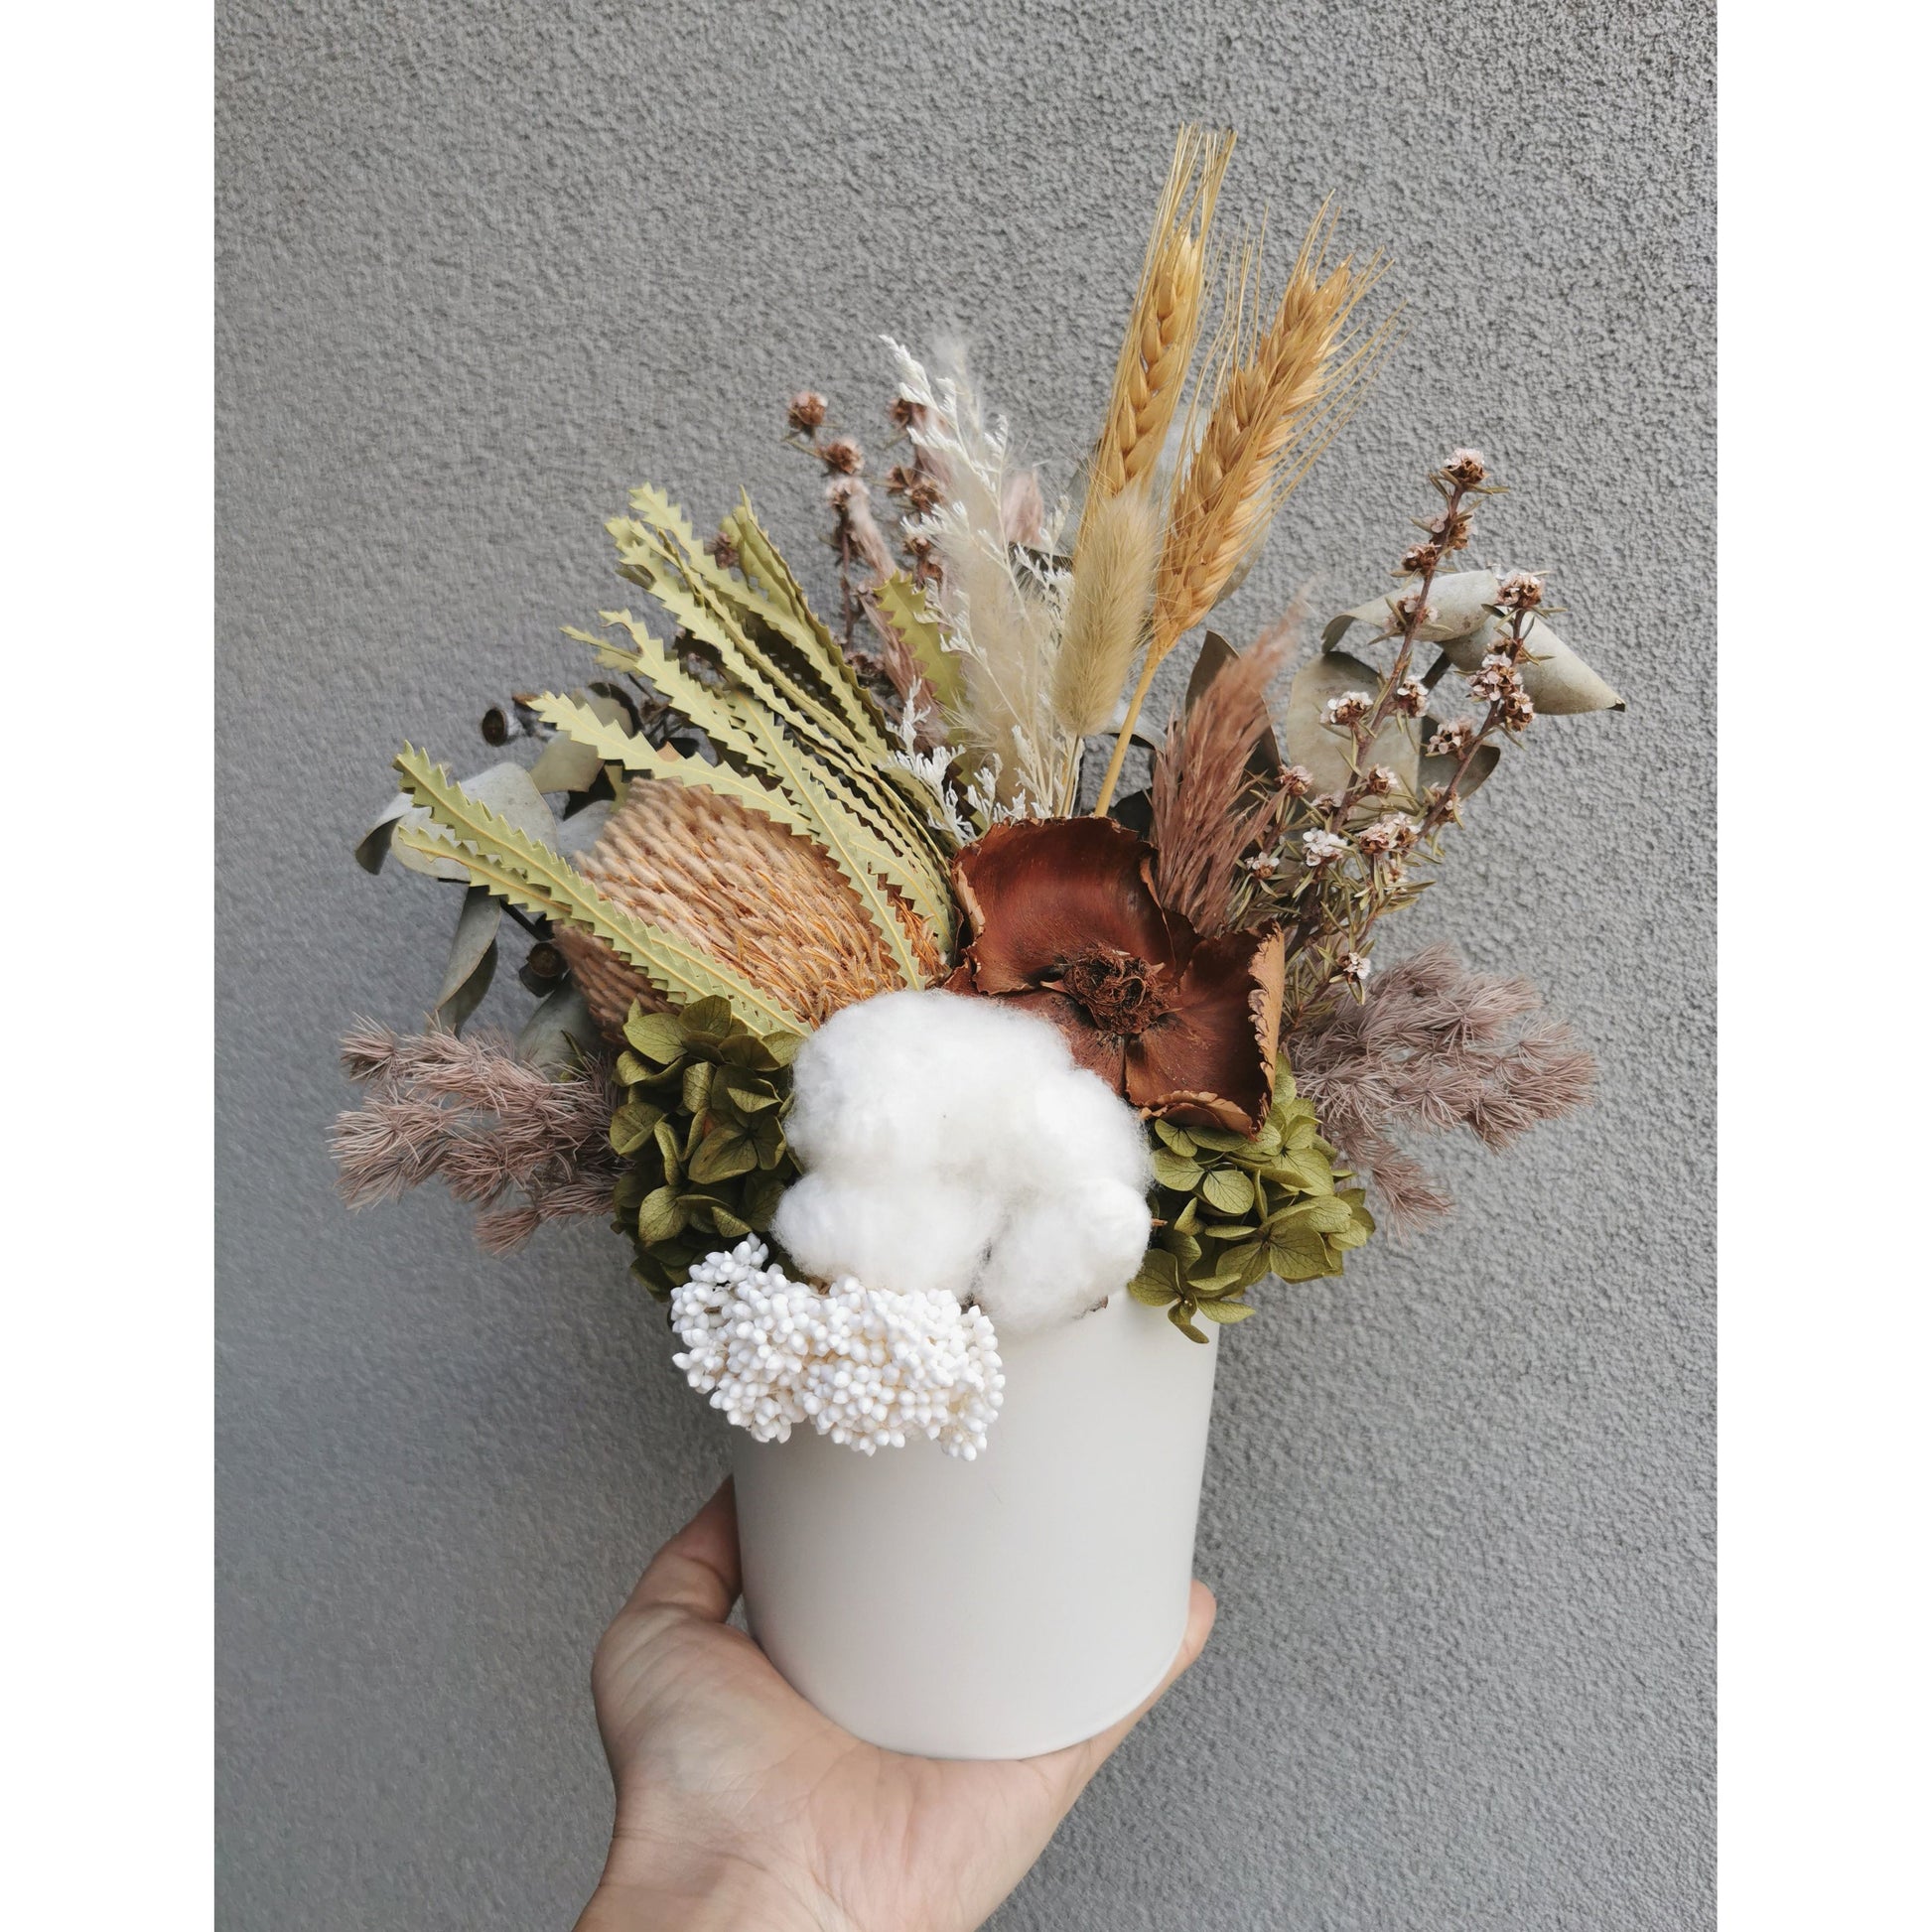 Mix of native dried flowers set in to a round white pot. Photo shows arrangement being held by hand against a blank wall